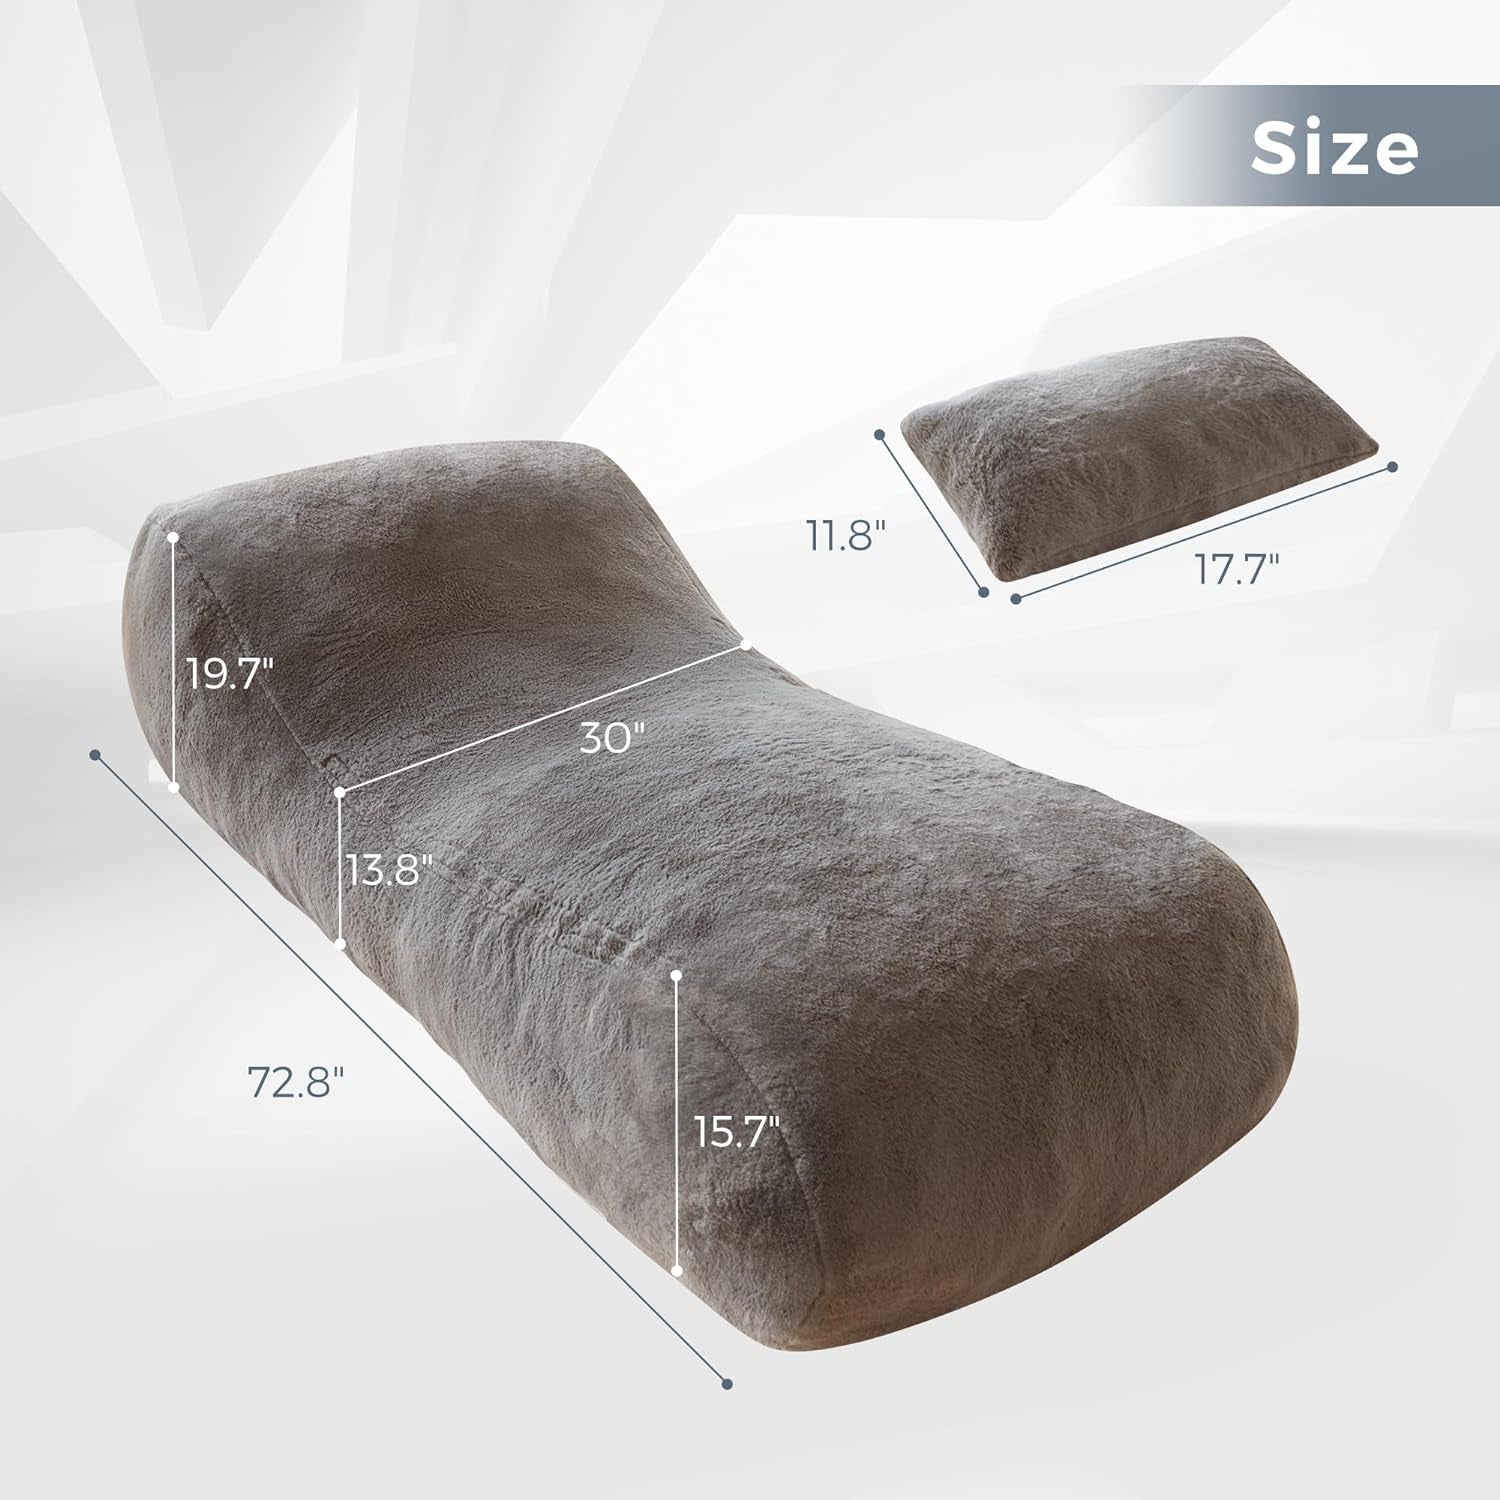 Bean Bag Bed with Pillow, Chaise Lounge Chair Indoor, Velvet Floor Sofa, Fainting Couch for Bedroom Living Room, Shredded Foam Filling, Removable and Machine Washable Cover